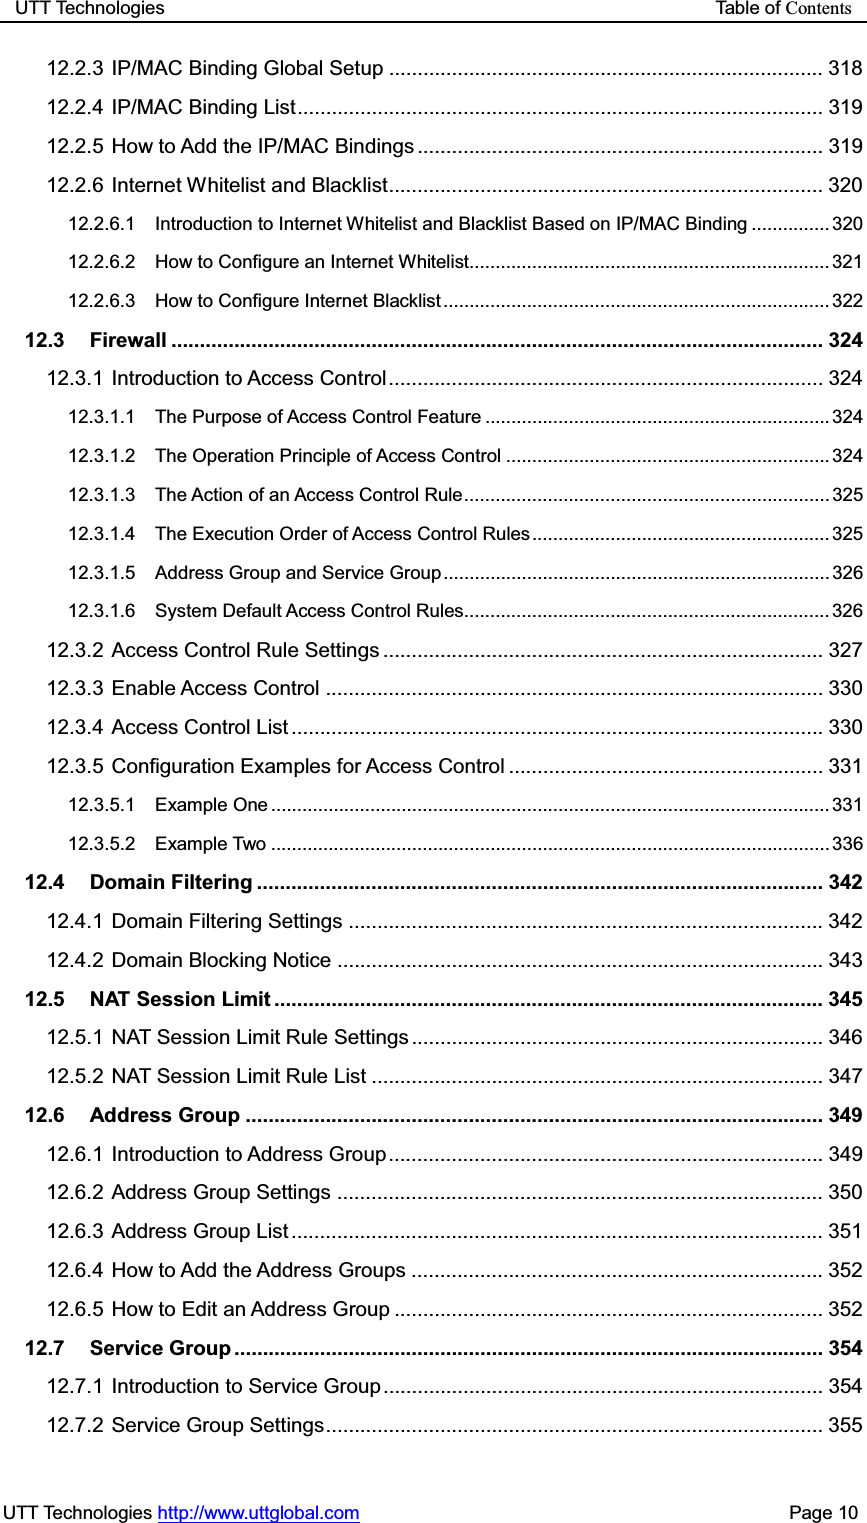 UTT Technologies                                                           Table of ContentsUTT Technologies http://www.uttglobal.com                                              Page 10 12.2.3 IP/MAC Binding Global Setup ............................................................................ 318 12.2.4 IP/MAC Binding List ............................................................................................ 319 12.2.5 How to Add the IP/MAC Bindings ....................................................................... 319 12.2.6 Internet Whitelist and Blacklist ............................................................................ 320 12.2.6.1 Introduction to Internet Whitelist and Blacklist Based on IP/MAC Binding ............... 320 12.2.6.2 How to Configure an Internet Whitelist..................................................................... 321 12.2.6.3 How to Configure Internet Blacklist .......................................................................... 322 12.3 Firewall .................................................................................................................. 324 12.3.1 Introduction to Access Control ............................................................................ 324 12.3.1.1 The Purpose of Access Control Feature .................................................................. 324 12.3.1.2 The Operation Principle of Access Control .............................................................. 324 12.3.1.3 The Action of an Access Control Rule ...................................................................... 325 12.3.1.4 The Execution Order of Access Control Rules ......................................................... 325 12.3.1.5 Address Group and Service Group .......................................................................... 326 12.3.1.6 System Default Access Control Rules...................................................................... 326 12.3.2 Access Control Rule Settings ............................................................................. 327 12.3.3 Enable Access Control ....................................................................................... 330 12.3.4 Access Control List ............................................................................................. 330 12.3.5 Configuration Examples for Access Control ....................................................... 331 12.3.5.1 Example One ........................................................................................................... 331 12.3.5.2 Example Two ........................................................................................................... 336 12.4 Domain Filtering ................................................................................................... 342 12.4.1 Domain Filtering Settings ................................................................................... 342 12.4.2 Domain Blocking Notice ..................................................................................... 343 12.5 NAT Session Limit ................................................................................................ 345 12.5.1 NAT Session Limit Rule Settings ........................................................................ 346 12.5.2 NAT Session Limit Rule List ............................................................................... 347 12.6 Address Group ..................................................................................................... 349 12.6.1 Introduction to Address Group ............................................................................ 349 12.6.2 Address Group Settings ..................................................................................... 350 12.6.3 Address Group List ............................................................................................. 351 12.6.4 How to Add the Address Groups ........................................................................ 352 12.6.5 How to Edit an Address Group ........................................................................... 352 12.7 Service Group ....................................................................................................... 354 12.7.1 Introduction to Service Group ............................................................................. 354 12.7.2 Service Group Settings ....................................................................................... 355 